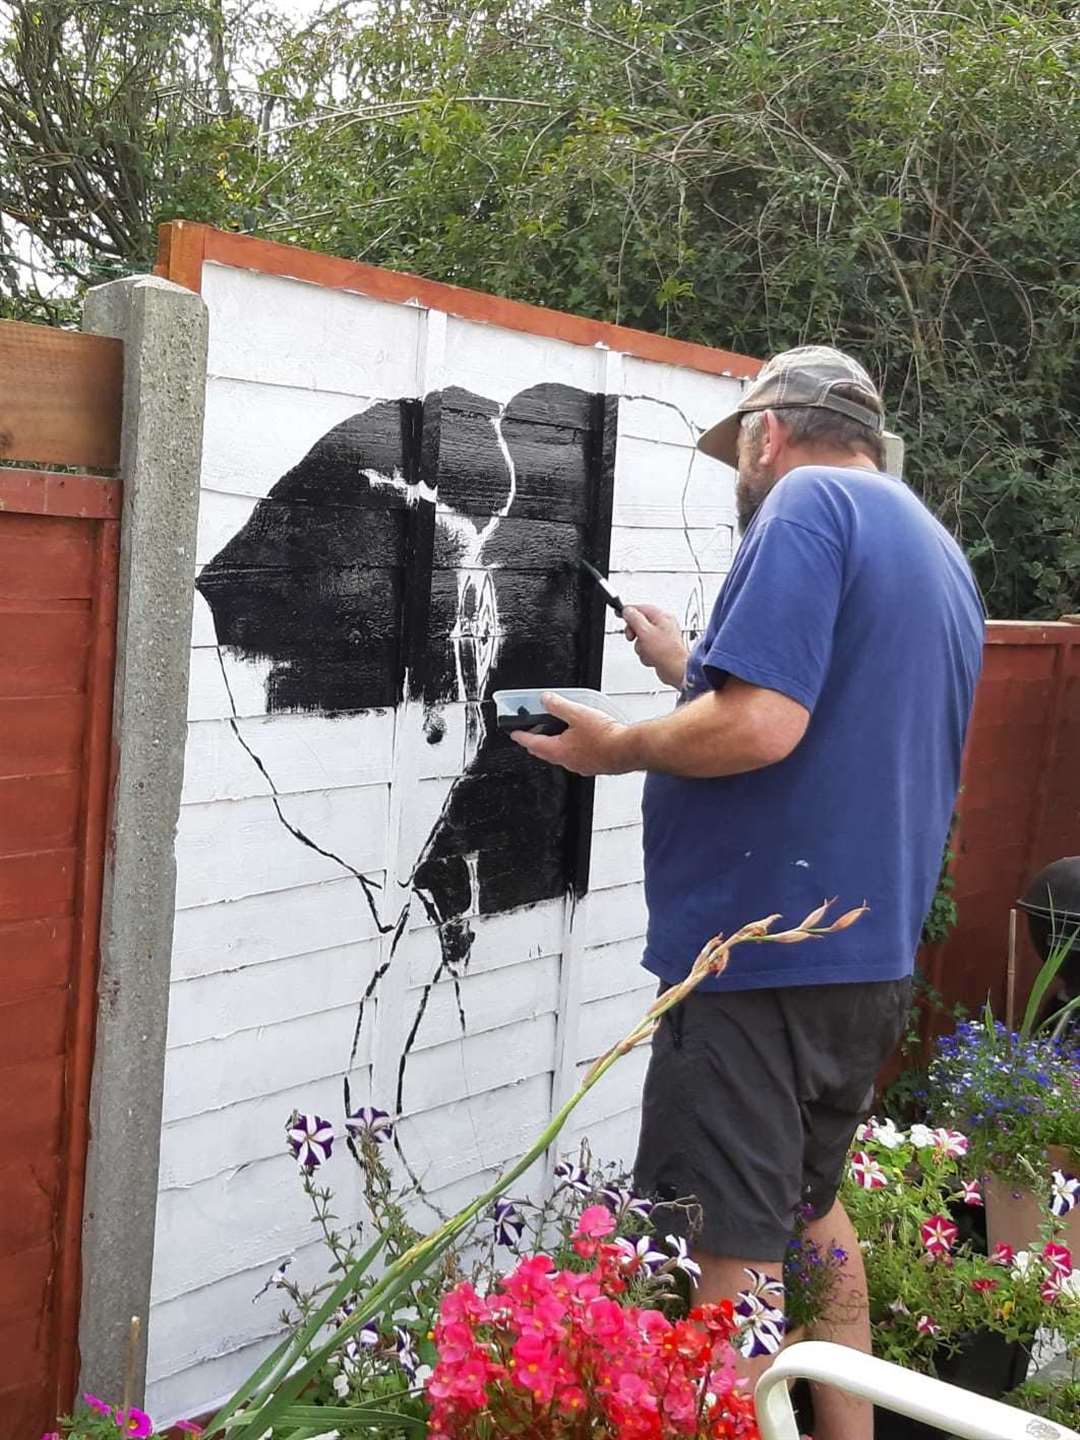 Ron Williams hard at work painting a fence panel in his Walderslade garden